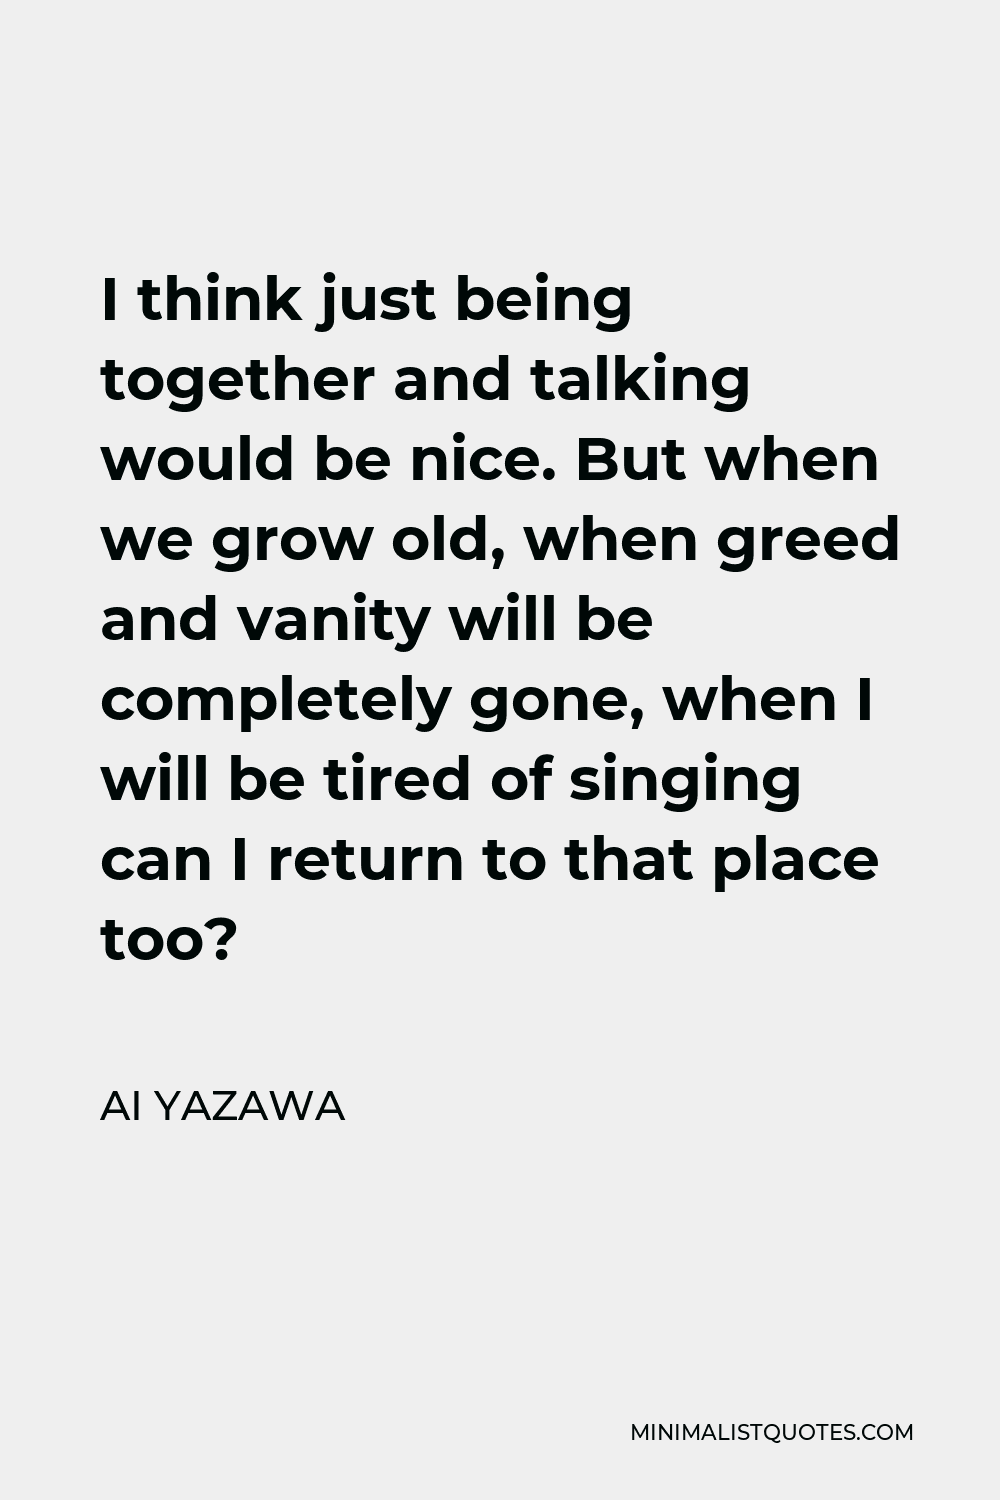 Ai Yazawa Quote - I think just being together and talking would be nice. But when we grow old, when greed and vanity will be completely gone, when I will be tired of singing can I return to that place too?